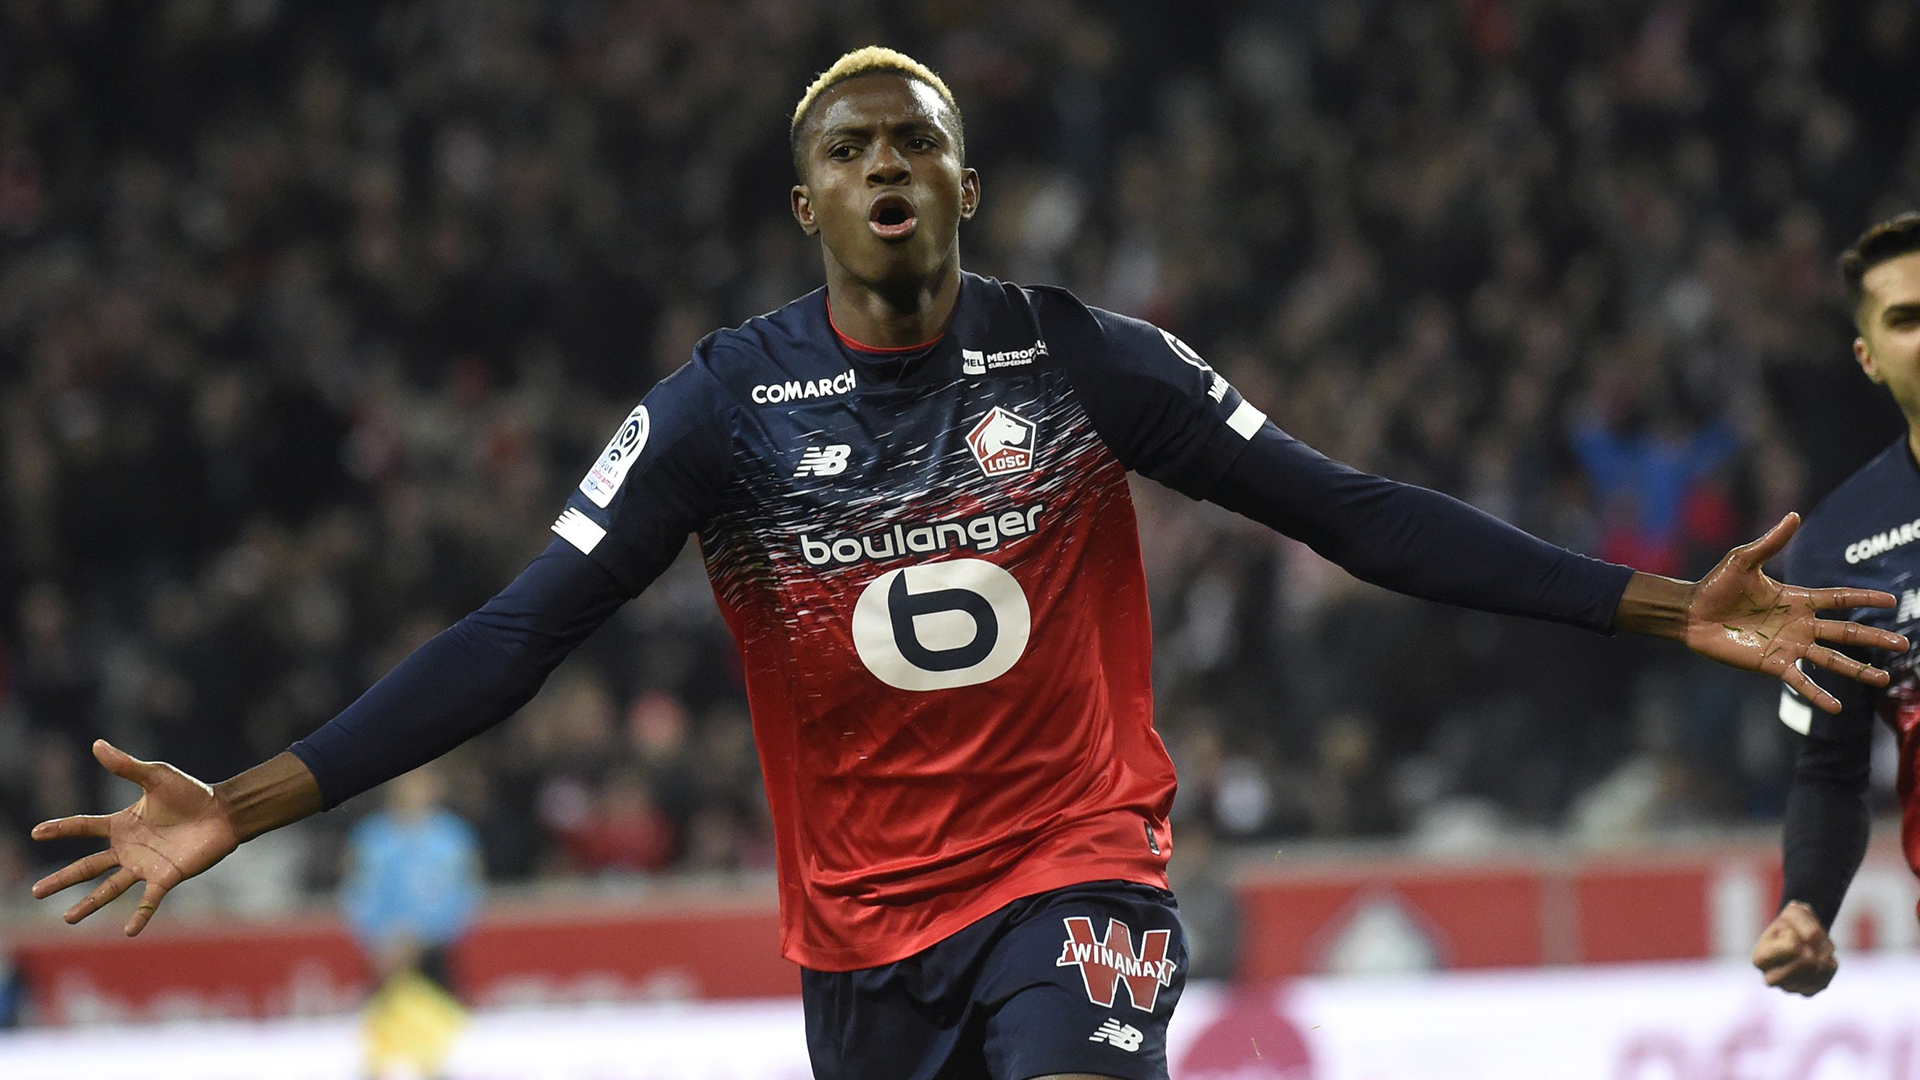 Lille striker Osimhen reveals he rejected Arsenal in 2015 but